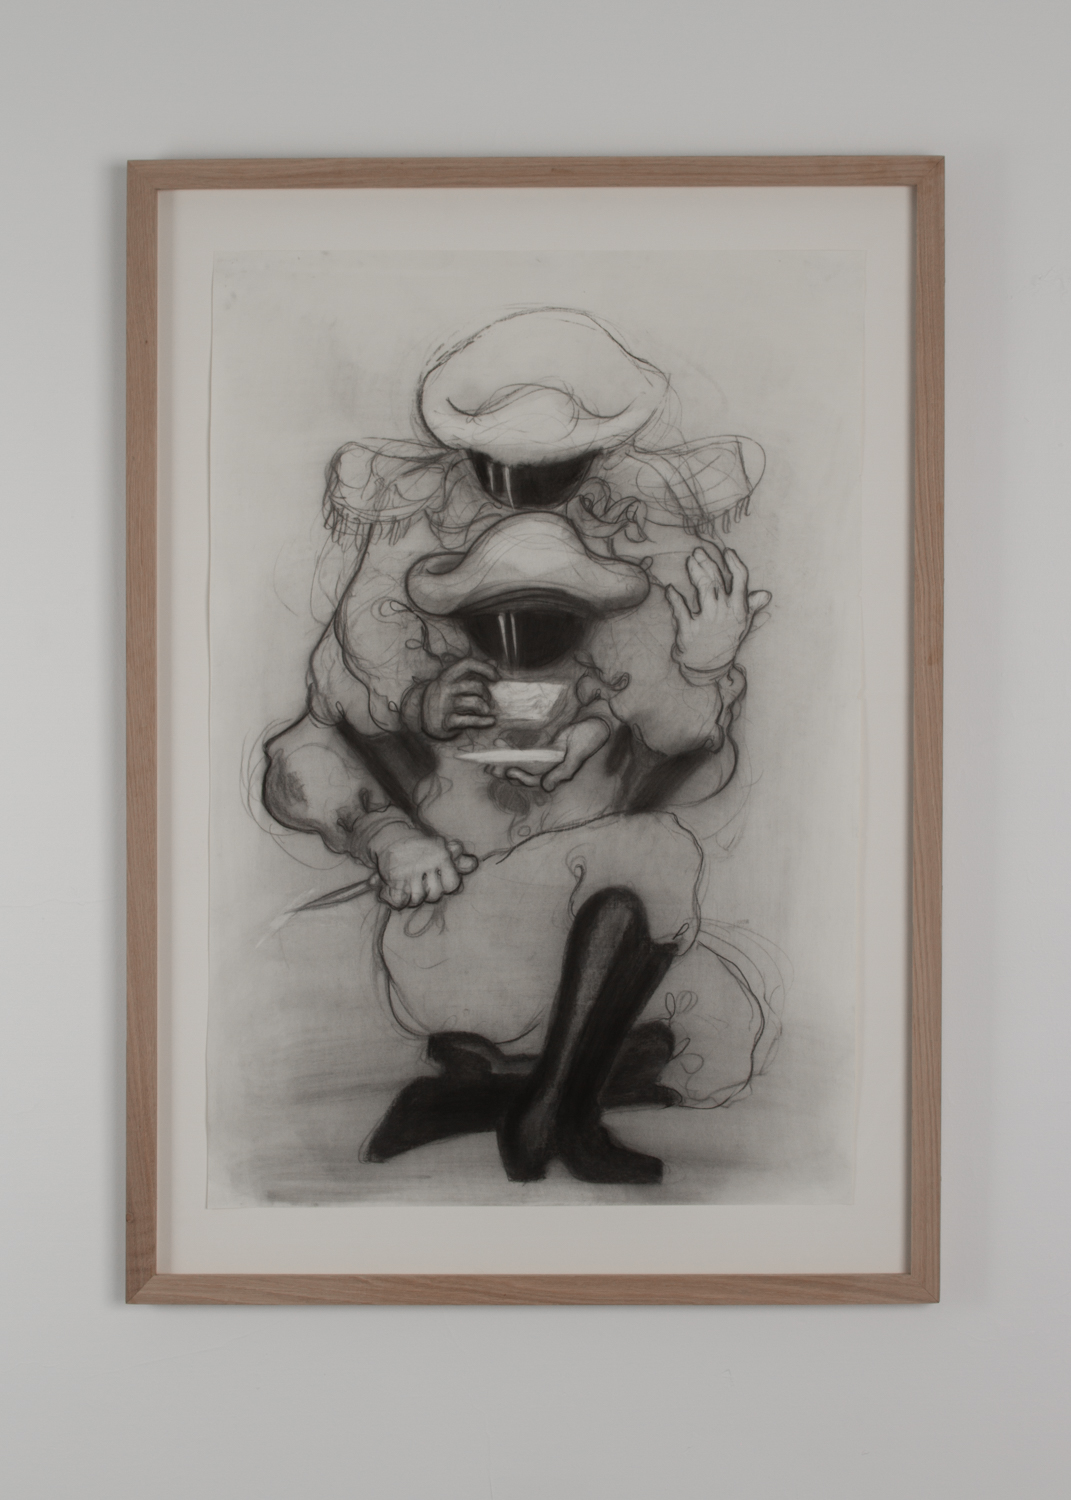 A charcoal drawing of two people. One is behind the other, holding a cup of tea and a saucer in front of the other's face. Their faces are hidden by the brims of their hats.